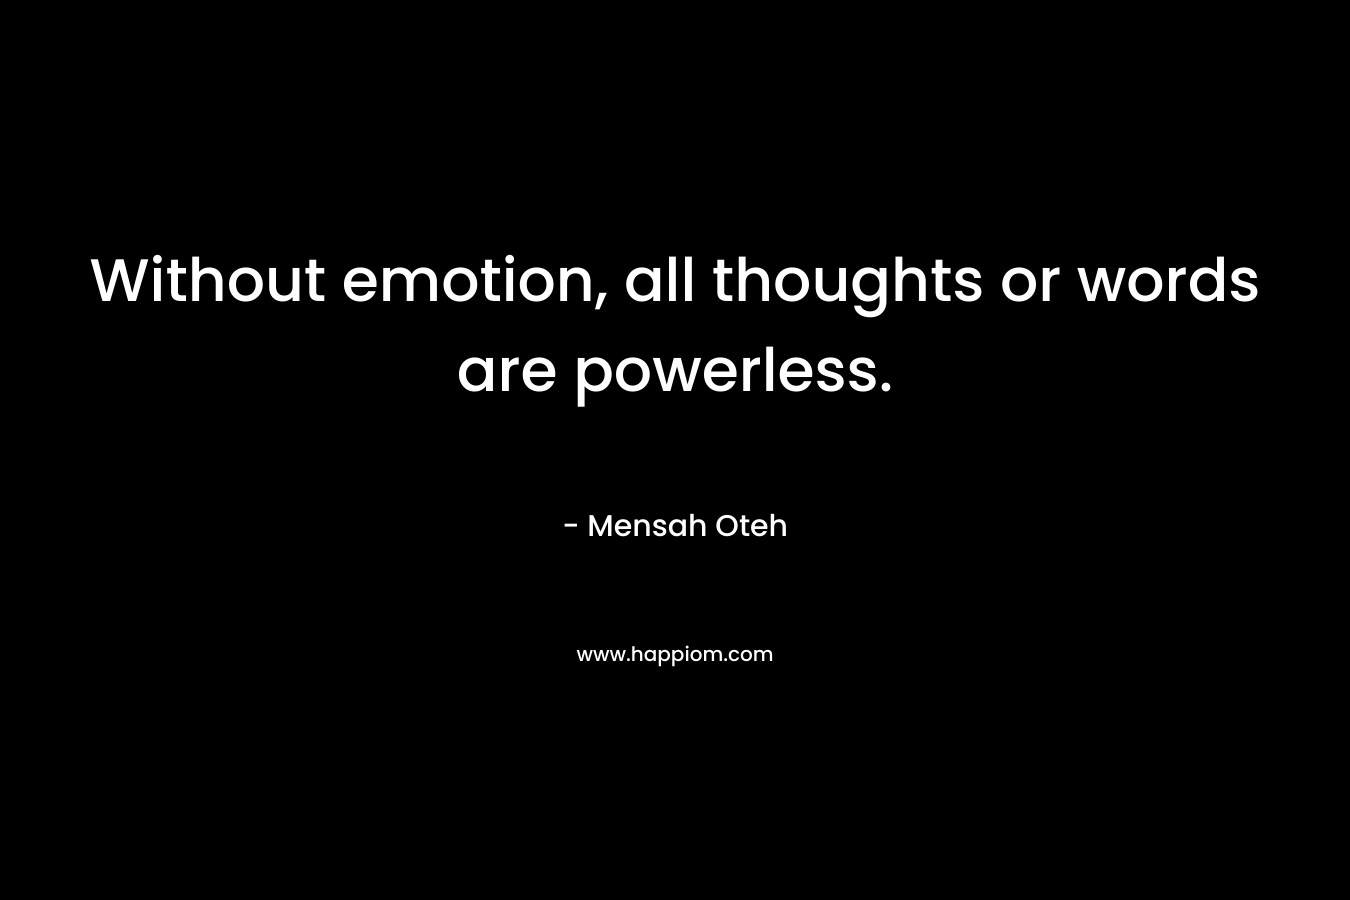 Without emotion, all thoughts or words are powerless.